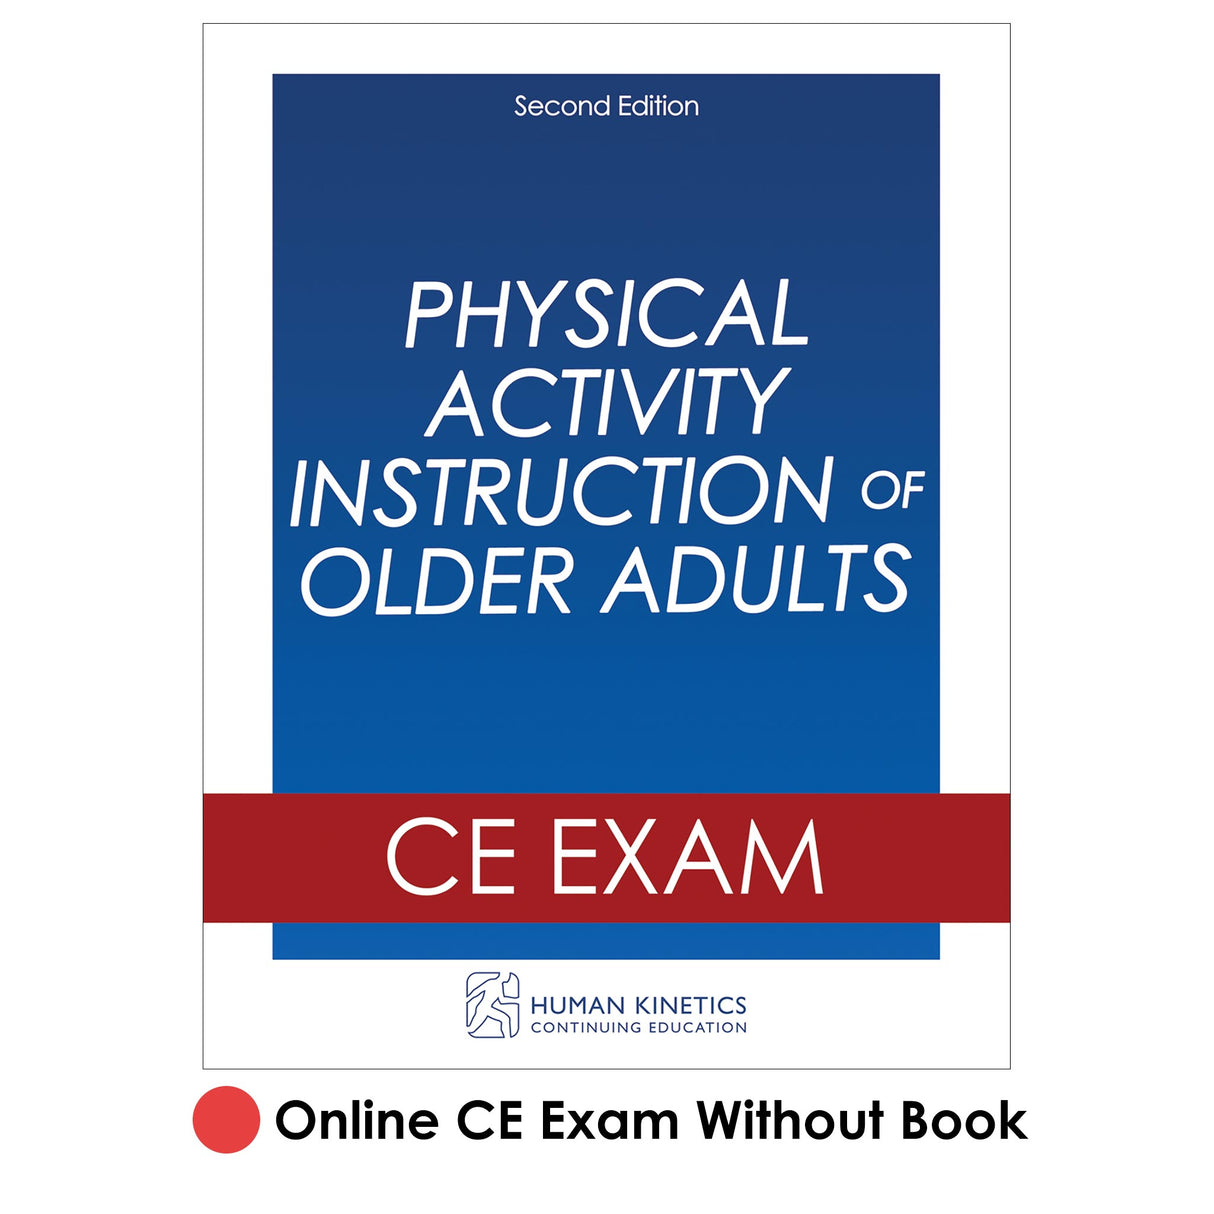 Physical Activity Instruction of Older Adults 2nd Edition Online CE Exam Without Book